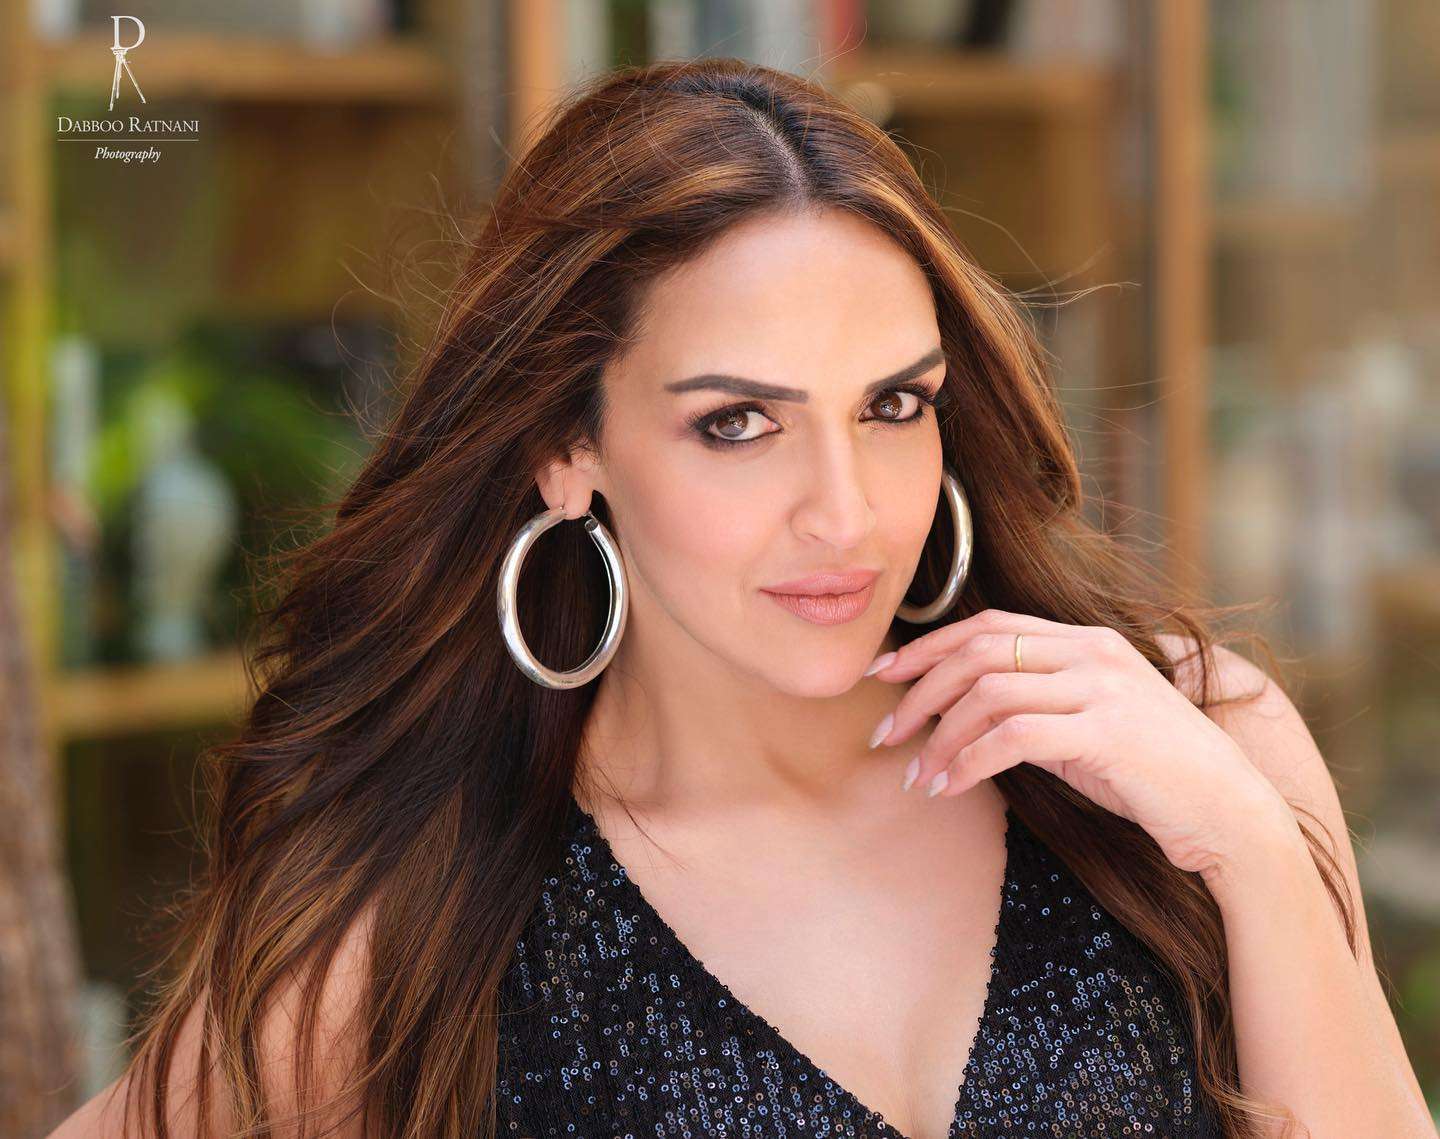 Who is Esha Deol? Age, Husband, Biography, Net Worth, Movies, Siblings, Children, Parents